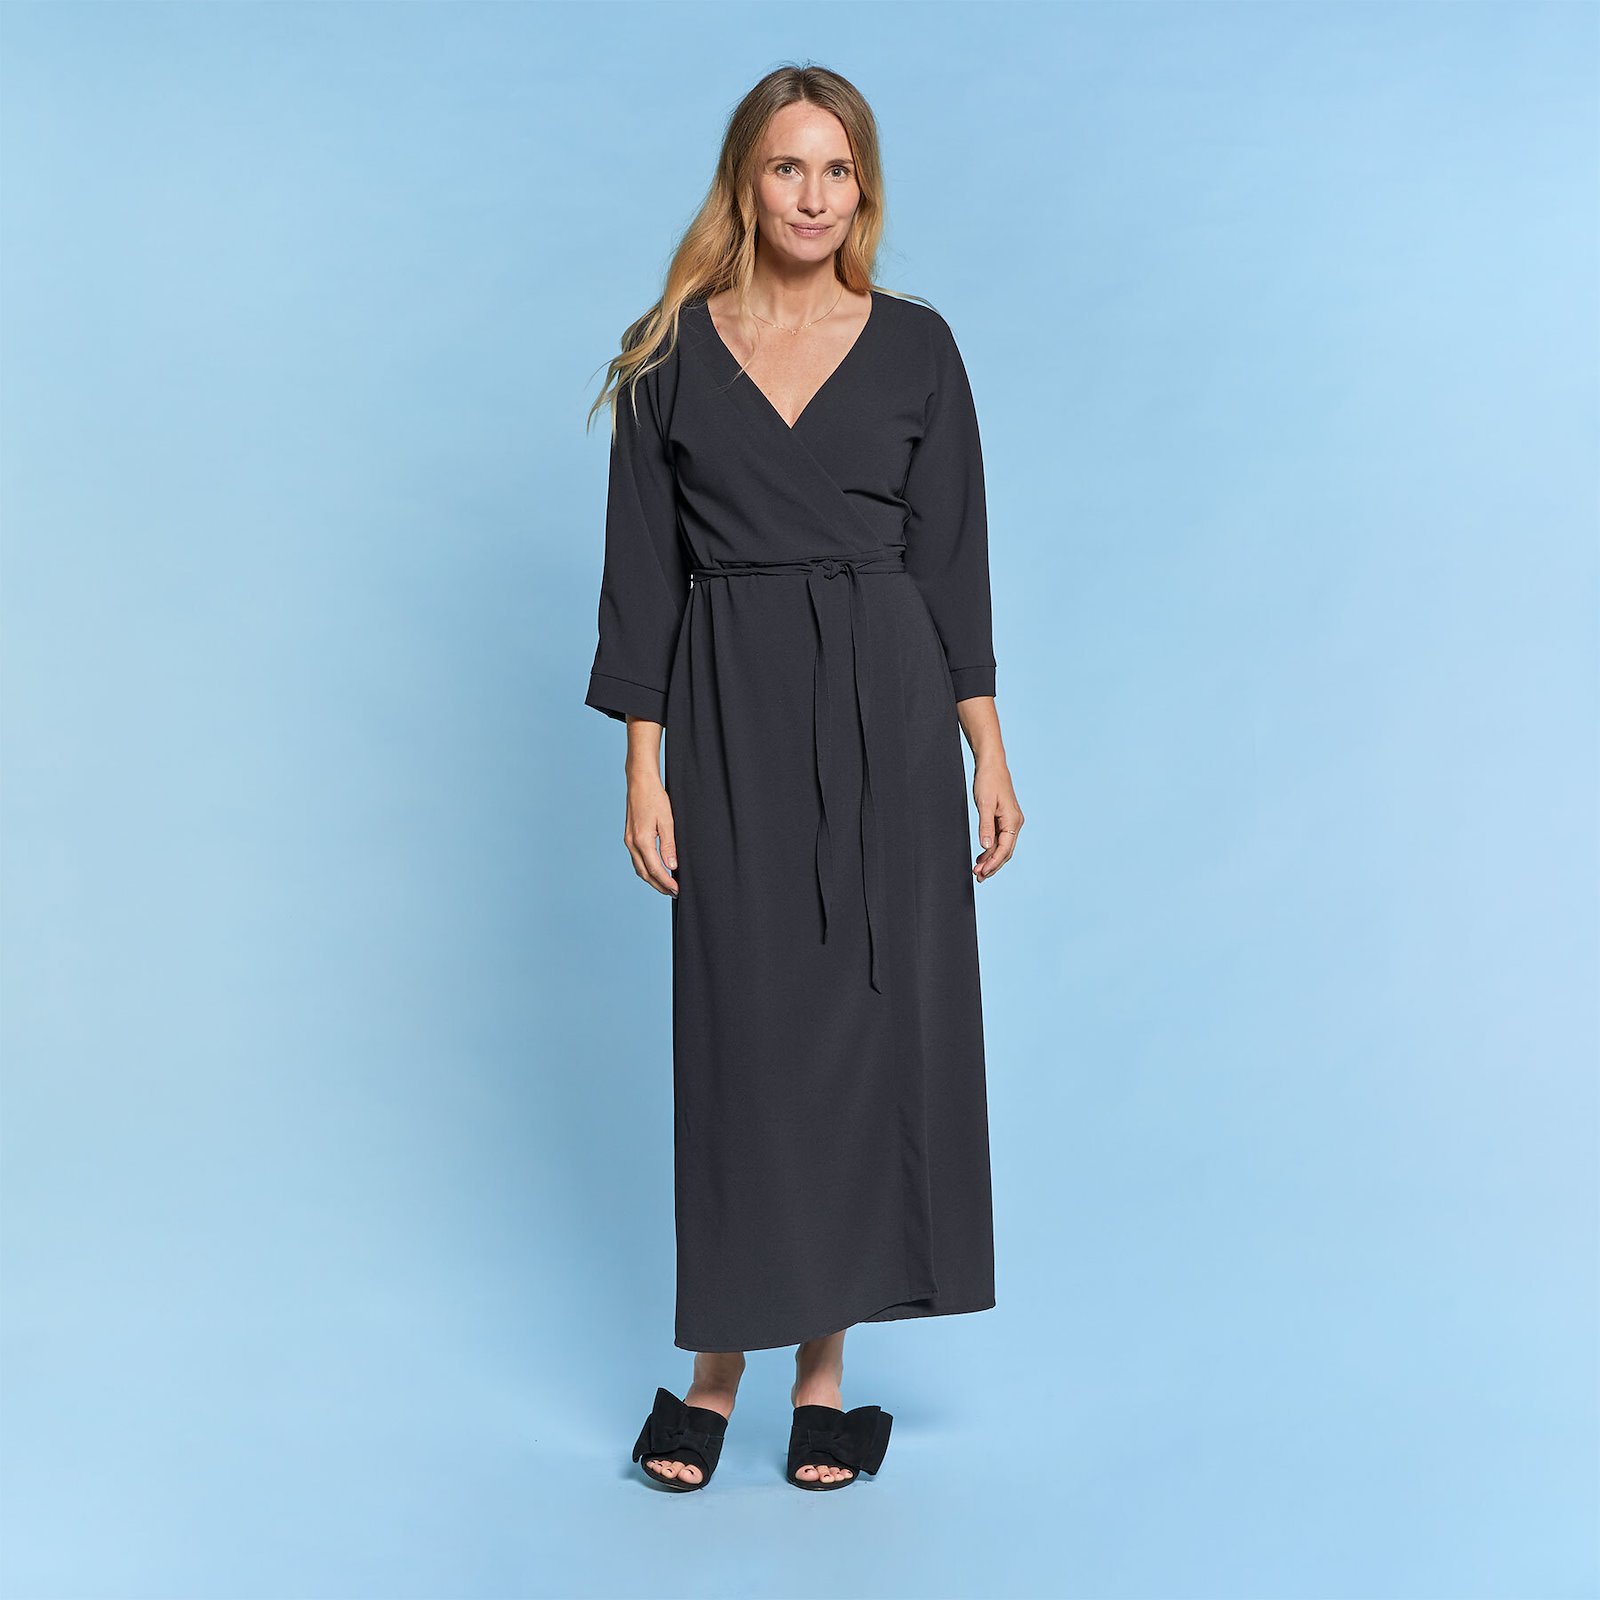 Wrap dress with batwing sleeves 6-18 p23162000_p23162001_p23162002_p23162003_p23162004_pack_d